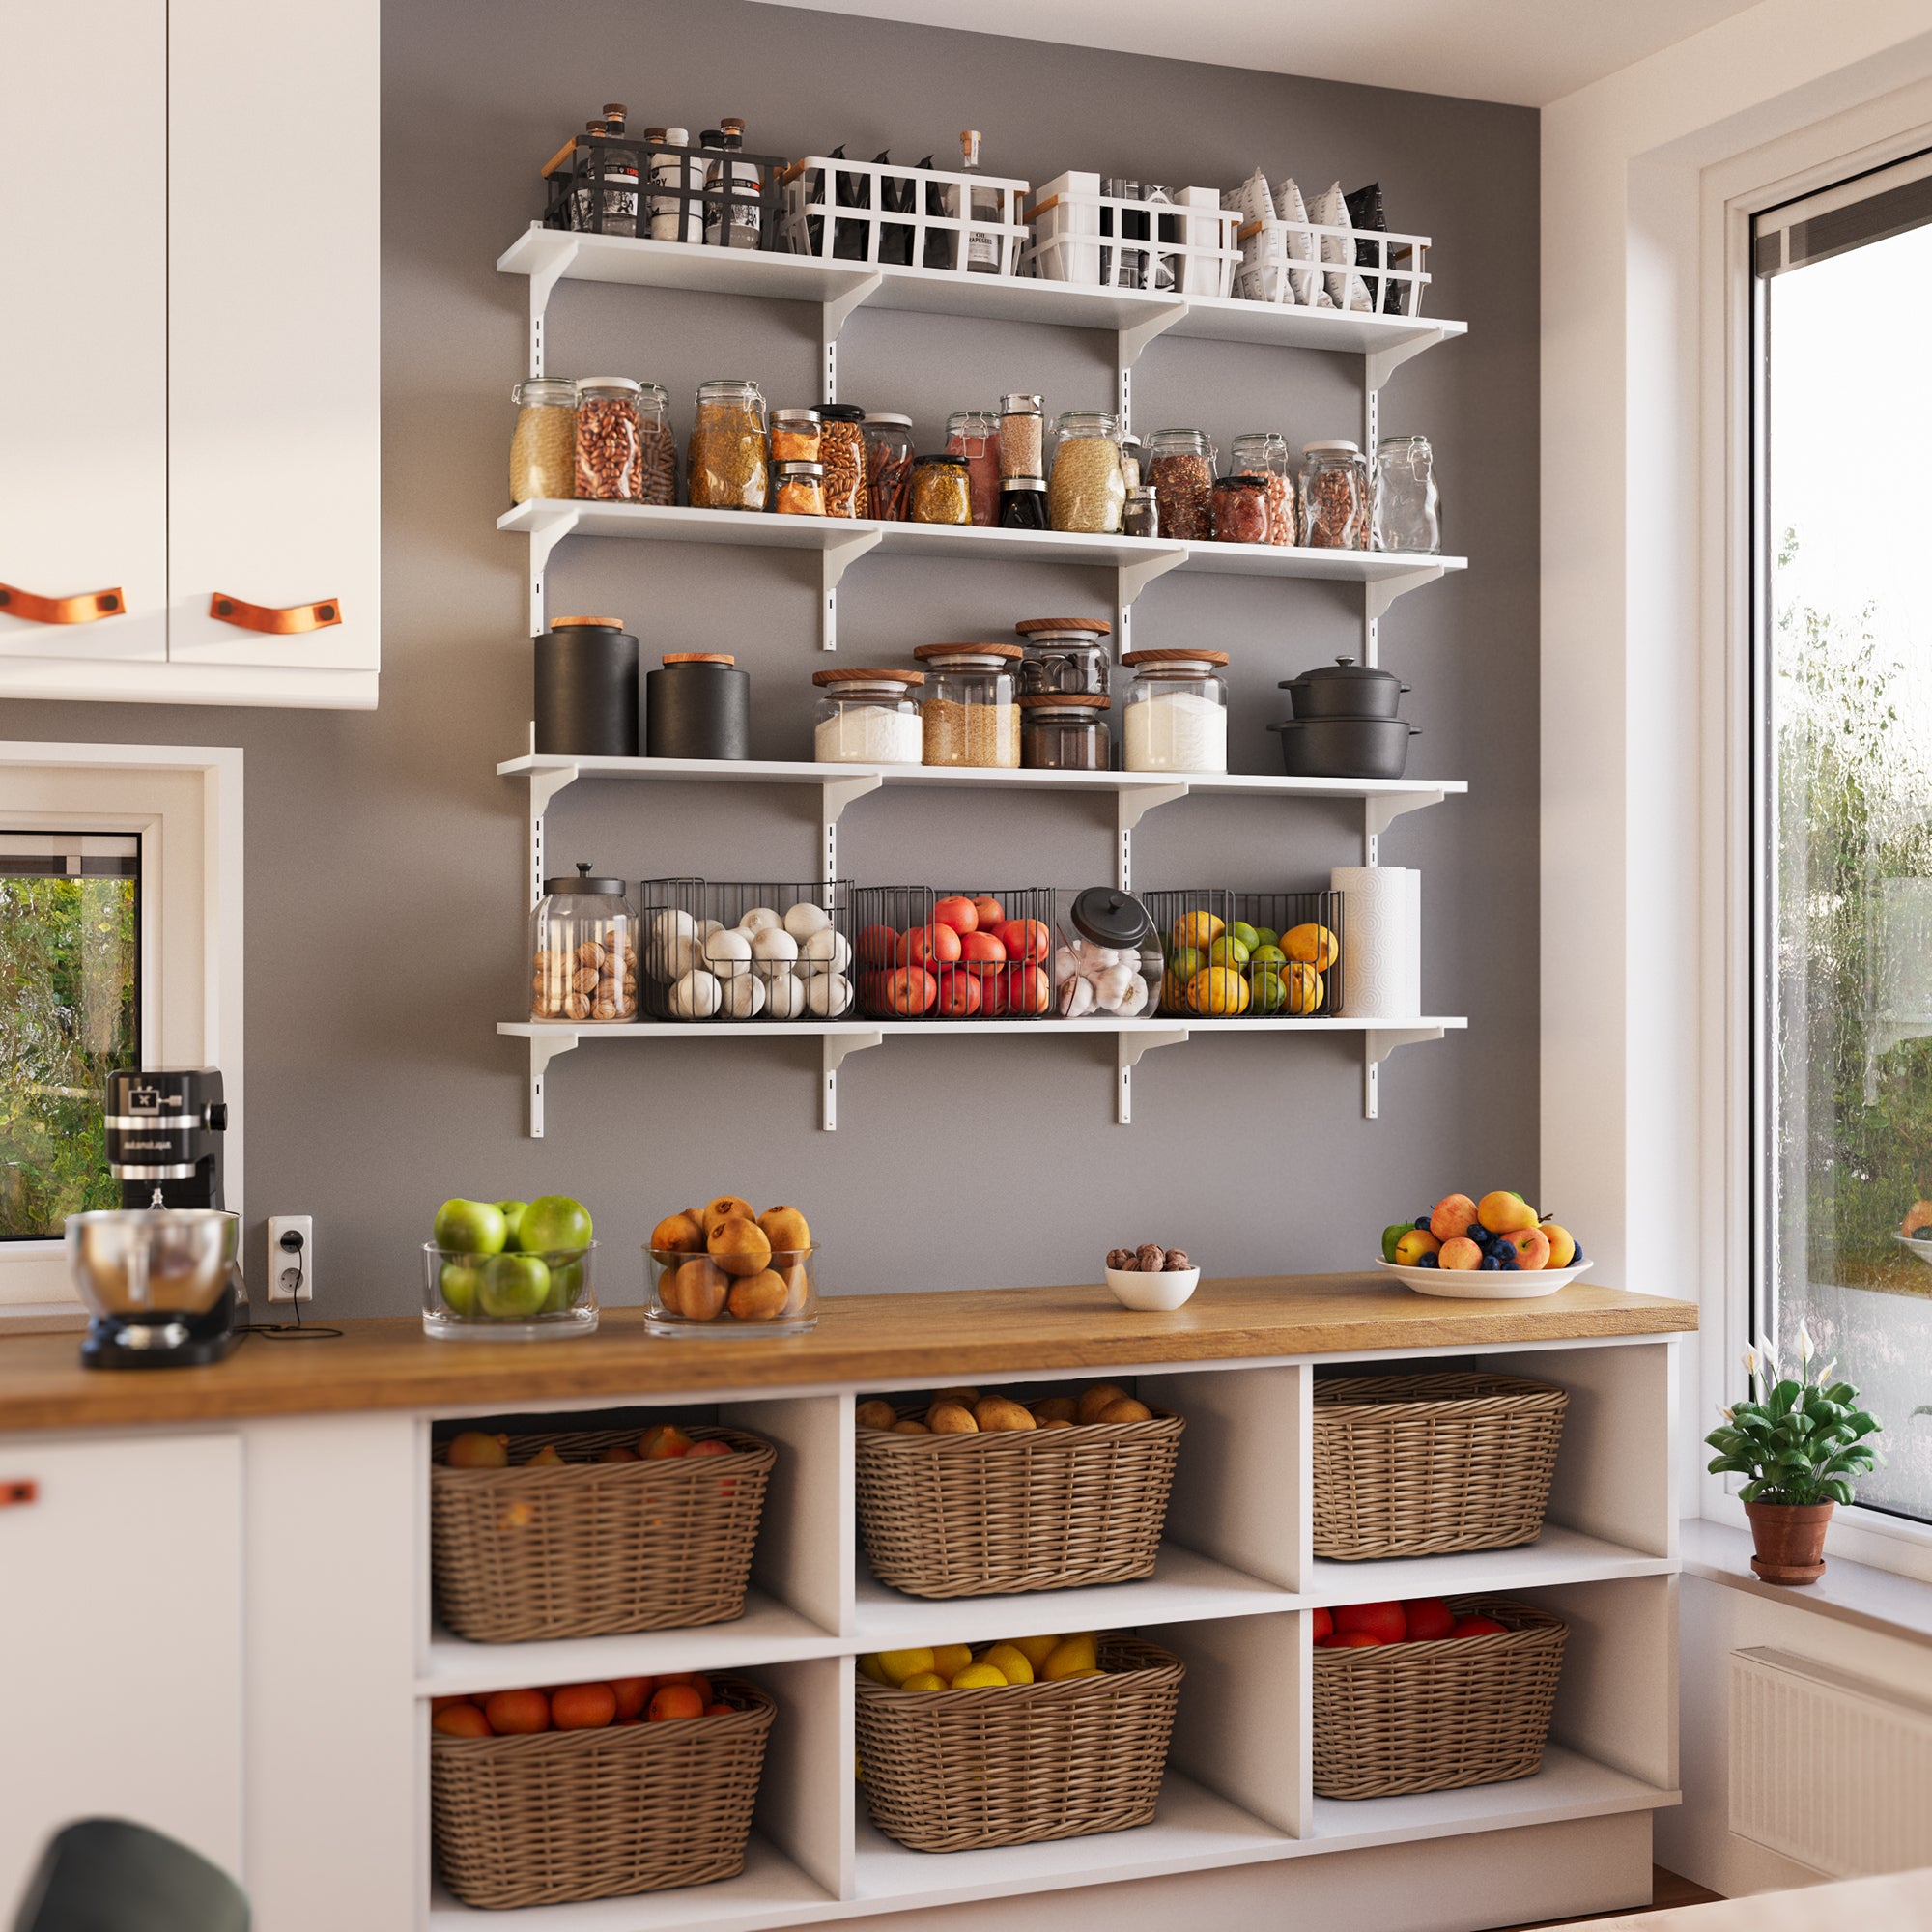 Floating kitchen shelves in a pantry organized with jars of food, wicker baskets, and a window view.